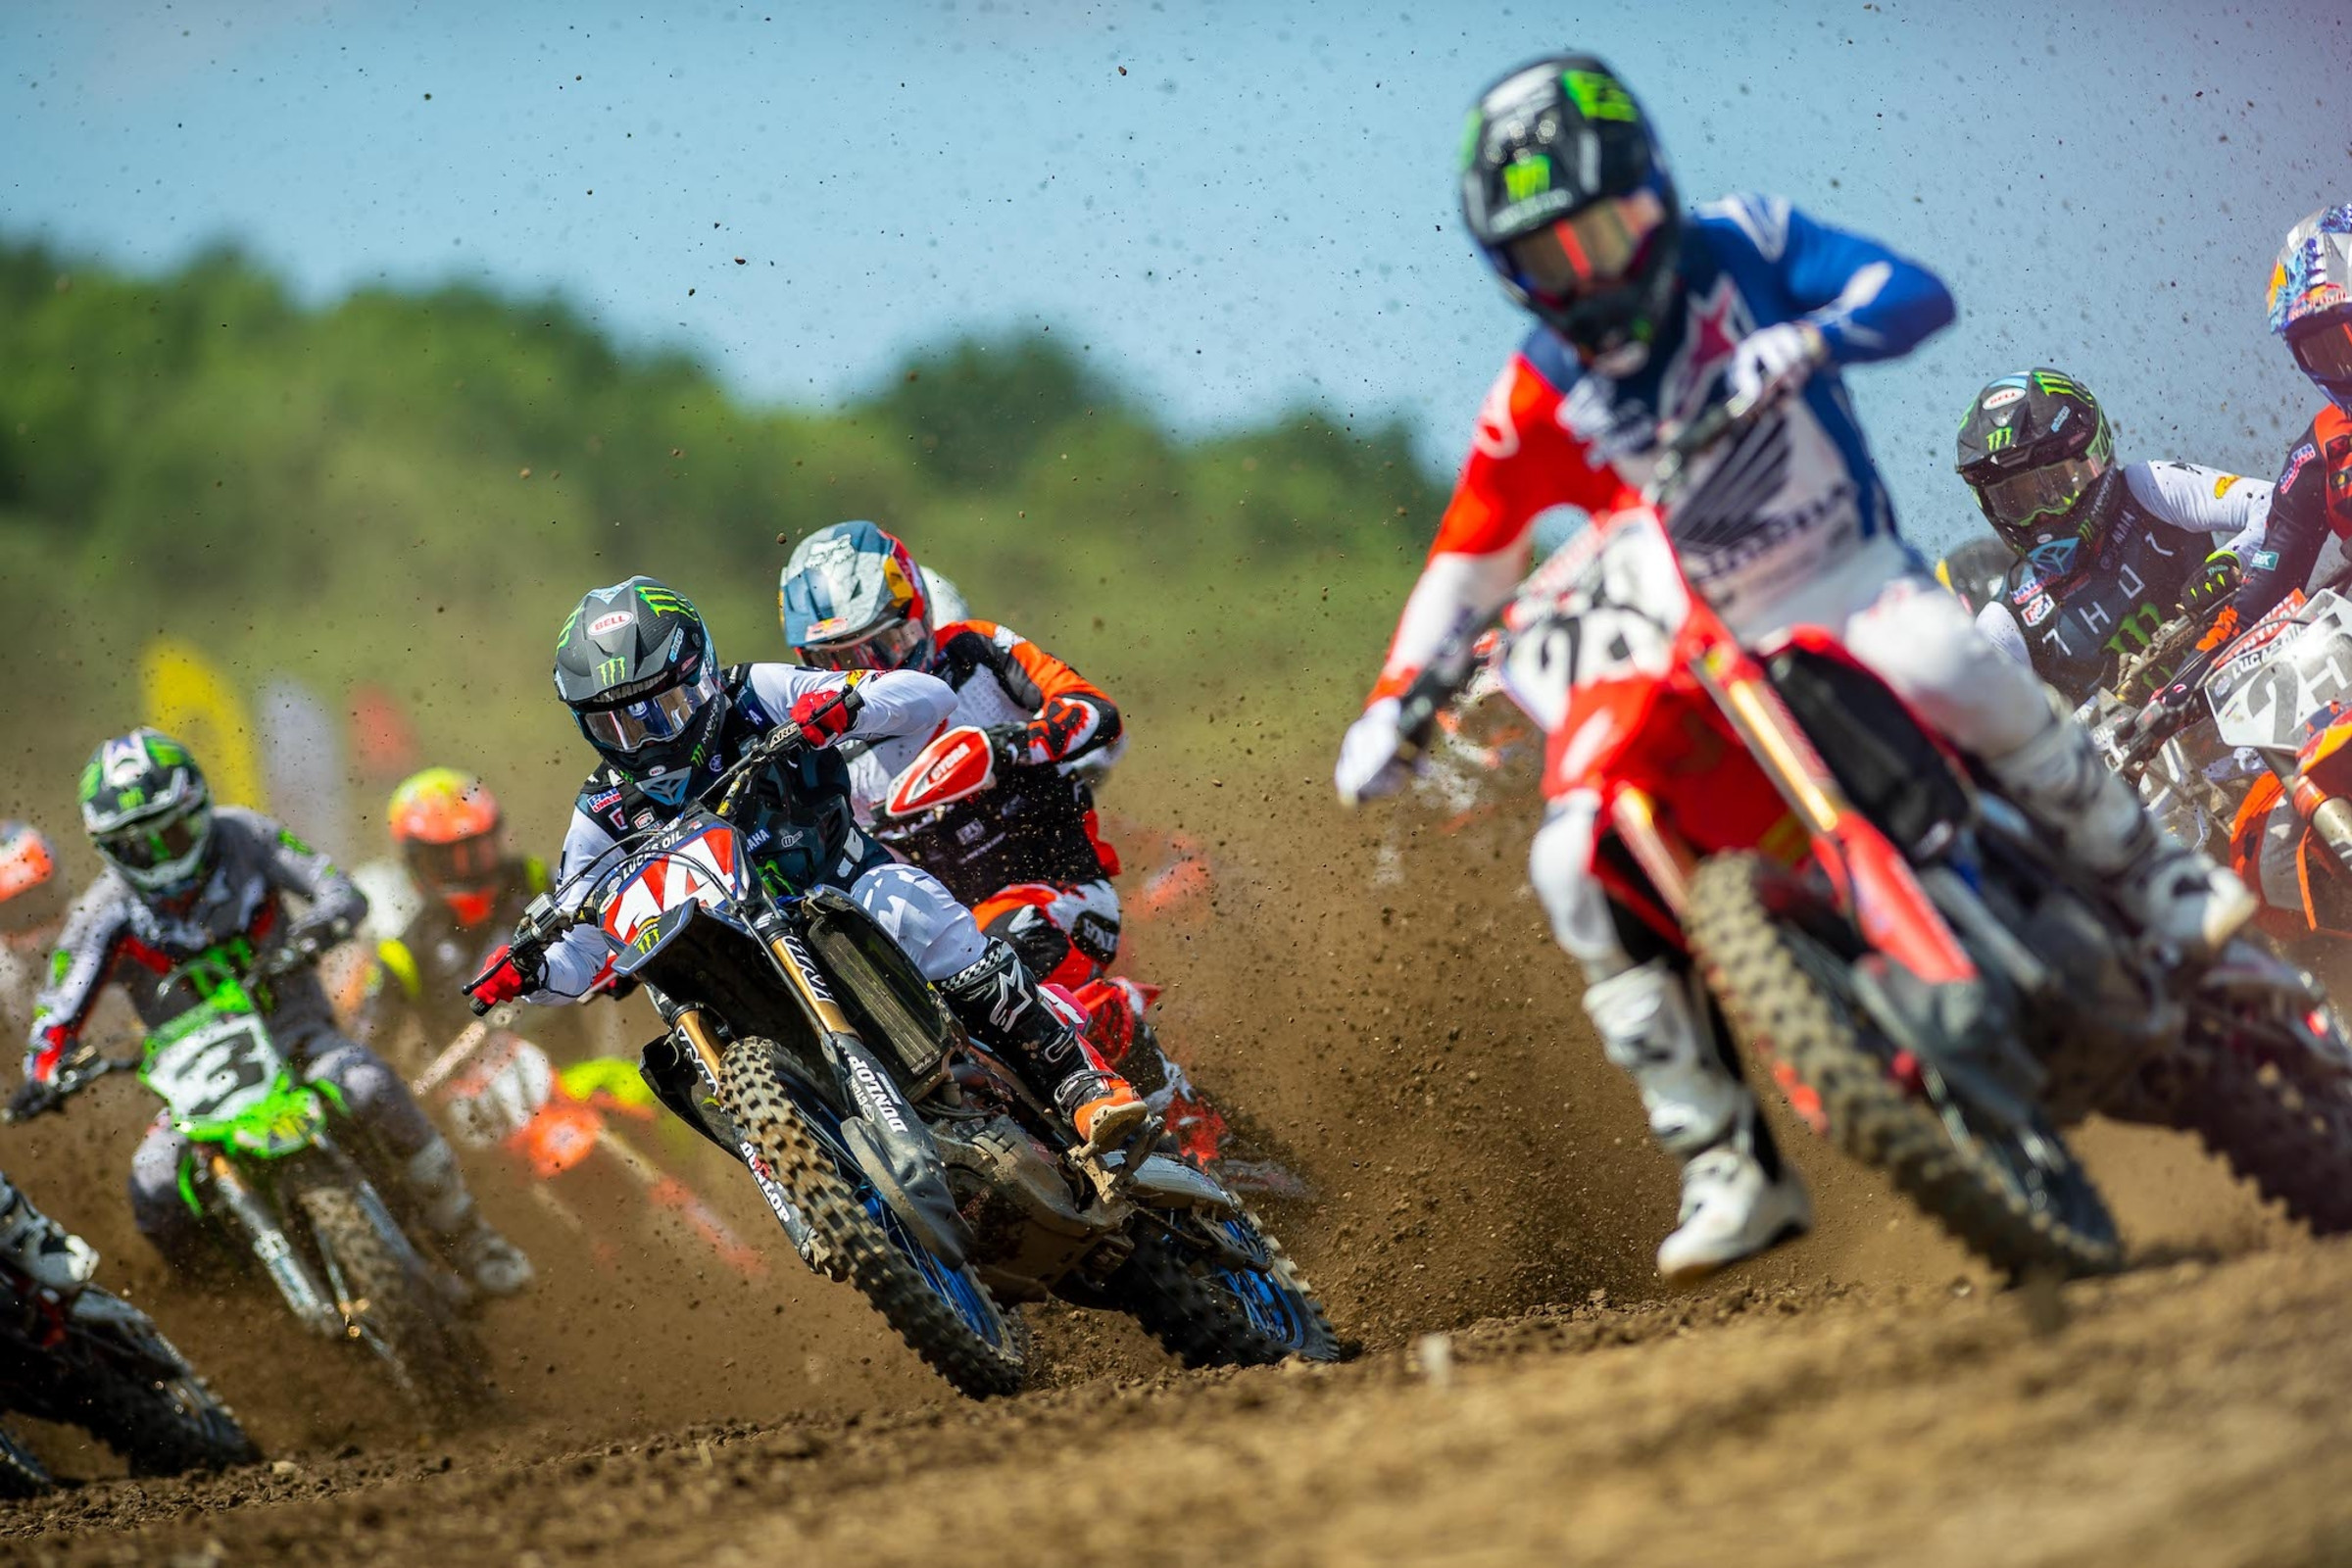 Recapping Loretta Lynns, the Deegan Bike Claim Situation, and More